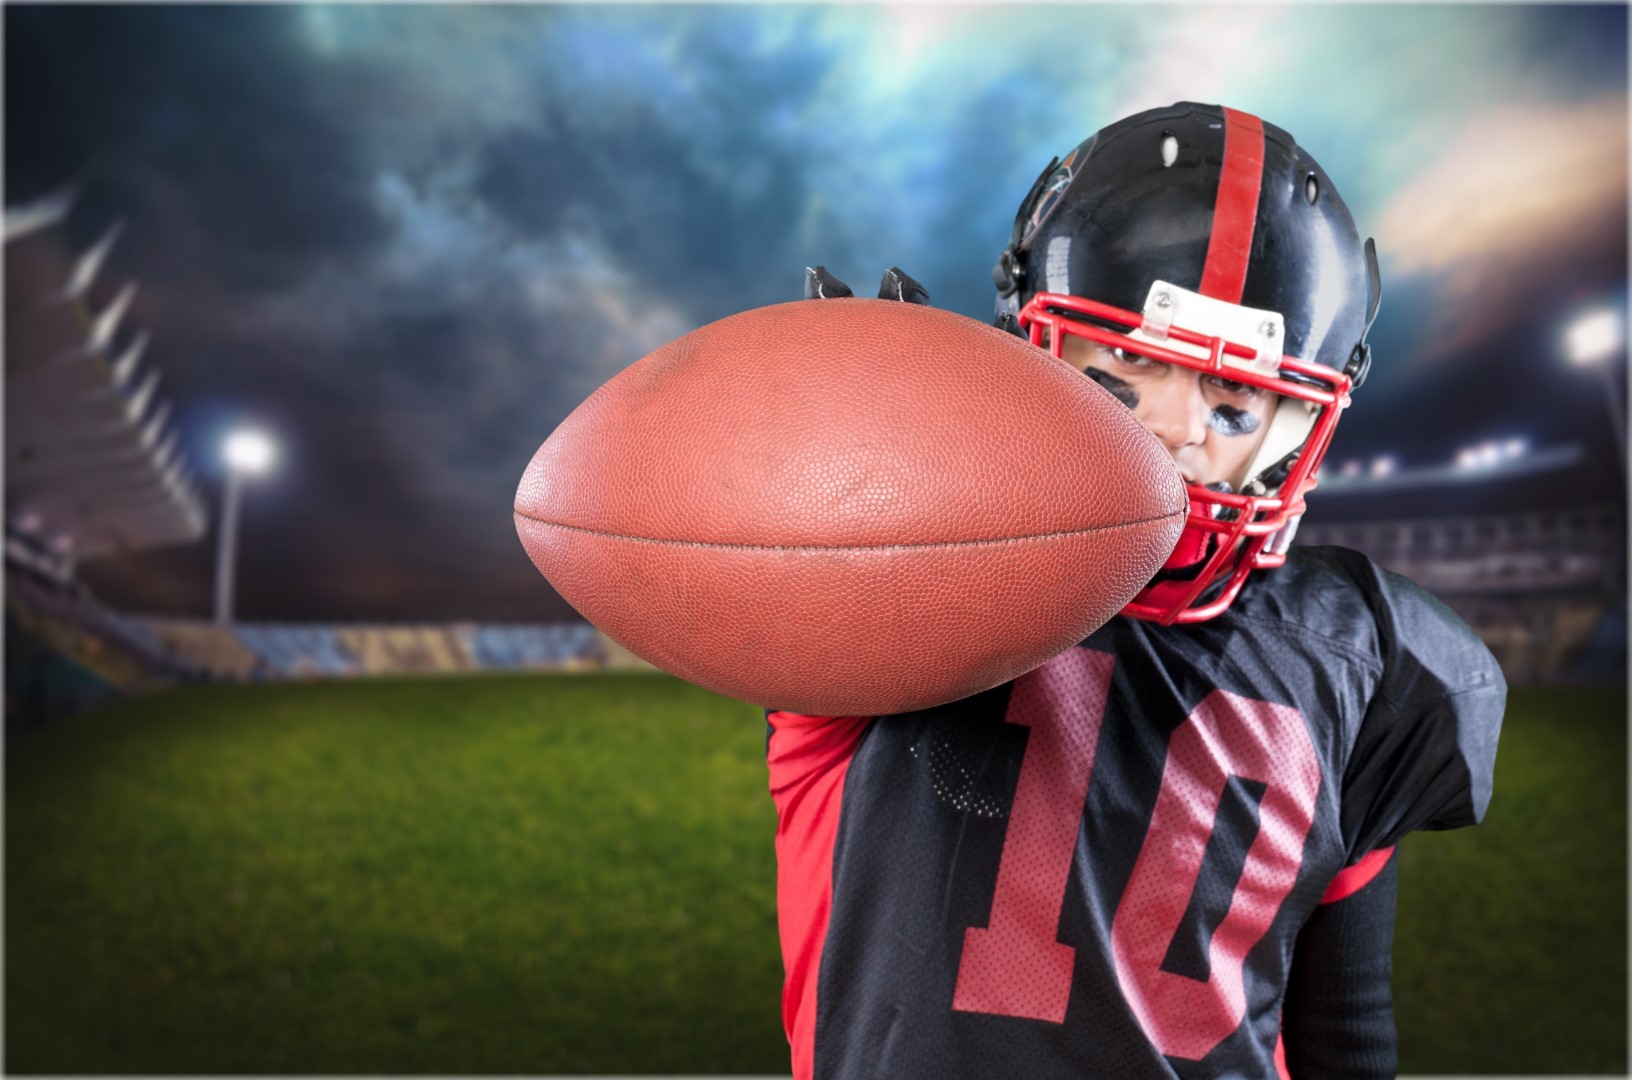 A football player wearing a black and red uniform holds a football in front of him.